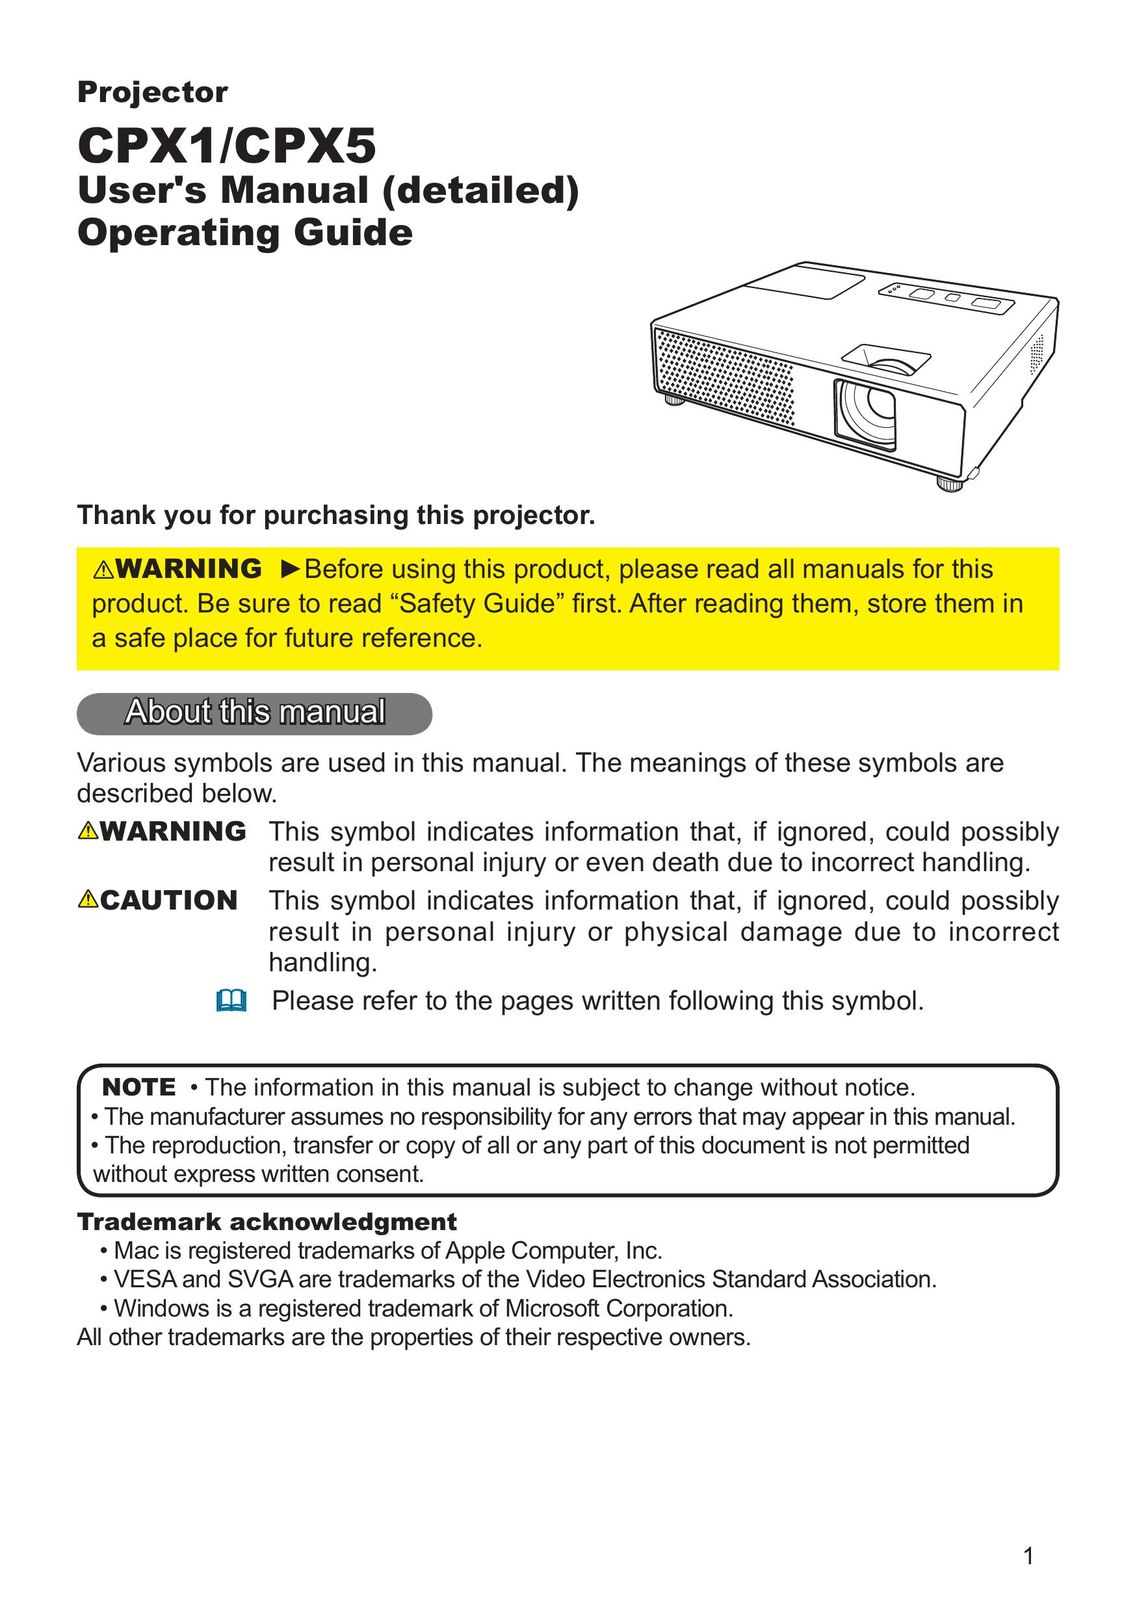 Apple CPX5 Projector User Manual